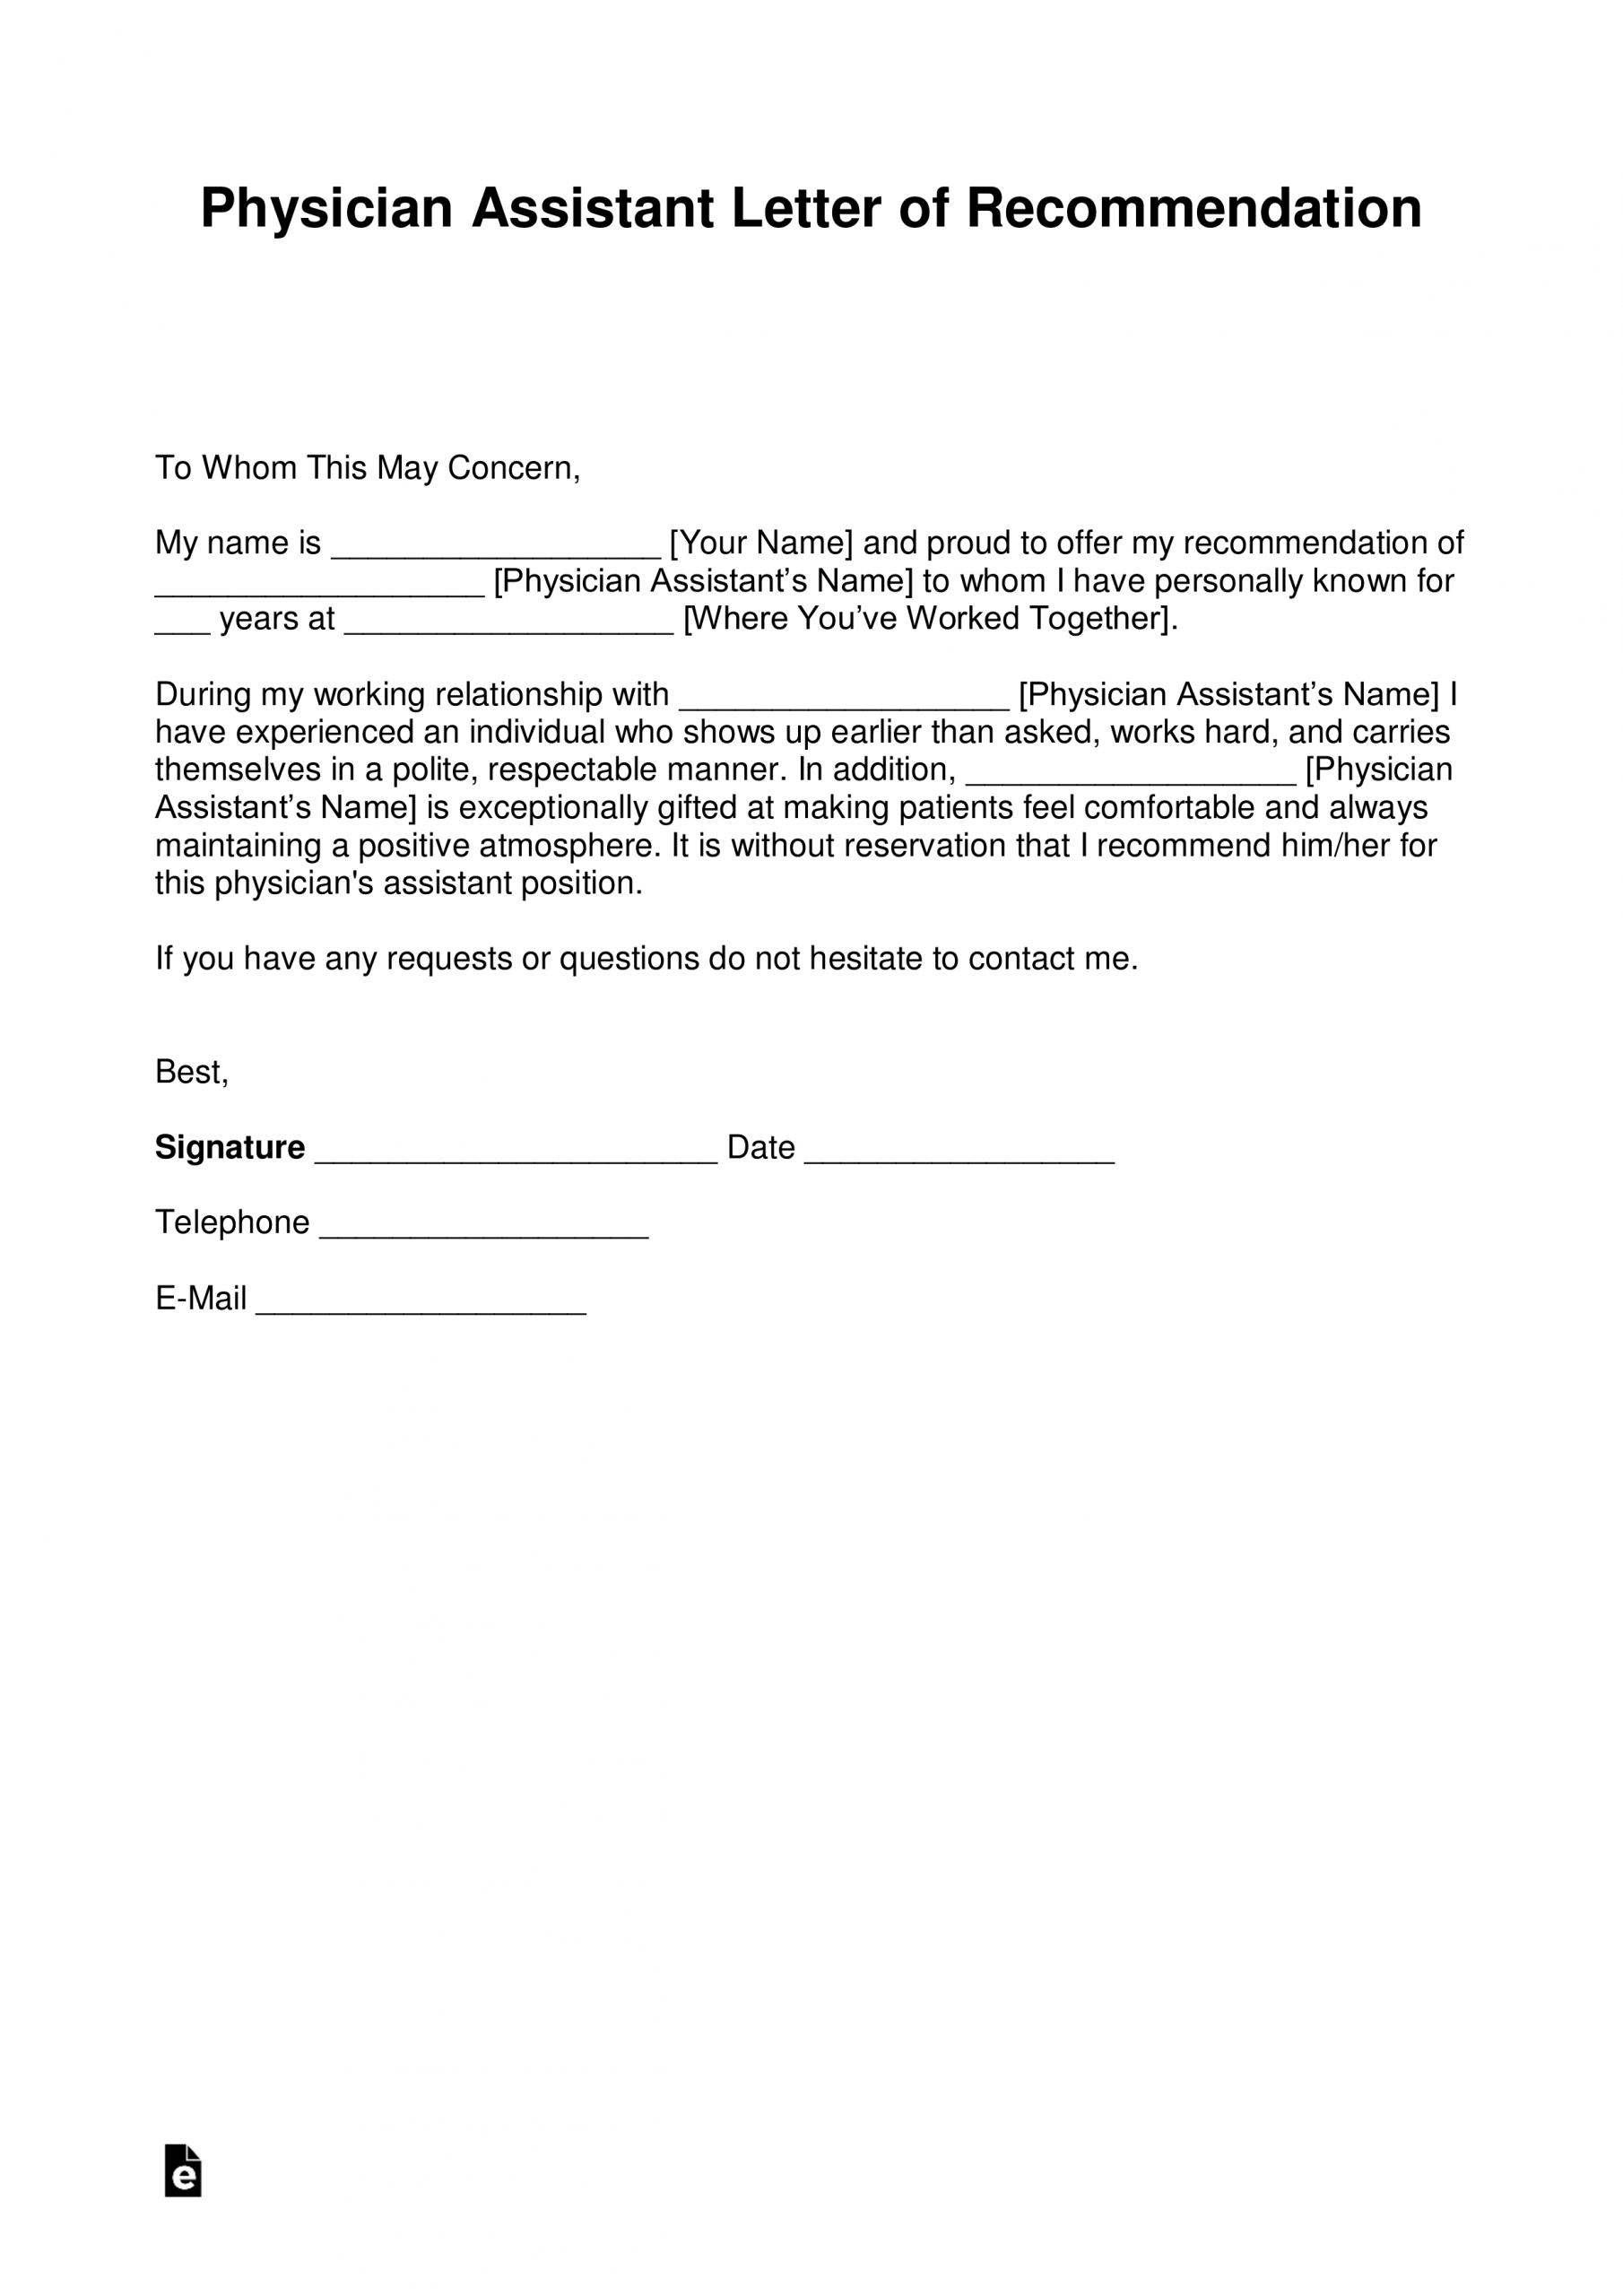 Free Physician Assistant Letter Of Recommendation Template pertaining to dimensions 2473 X 3497